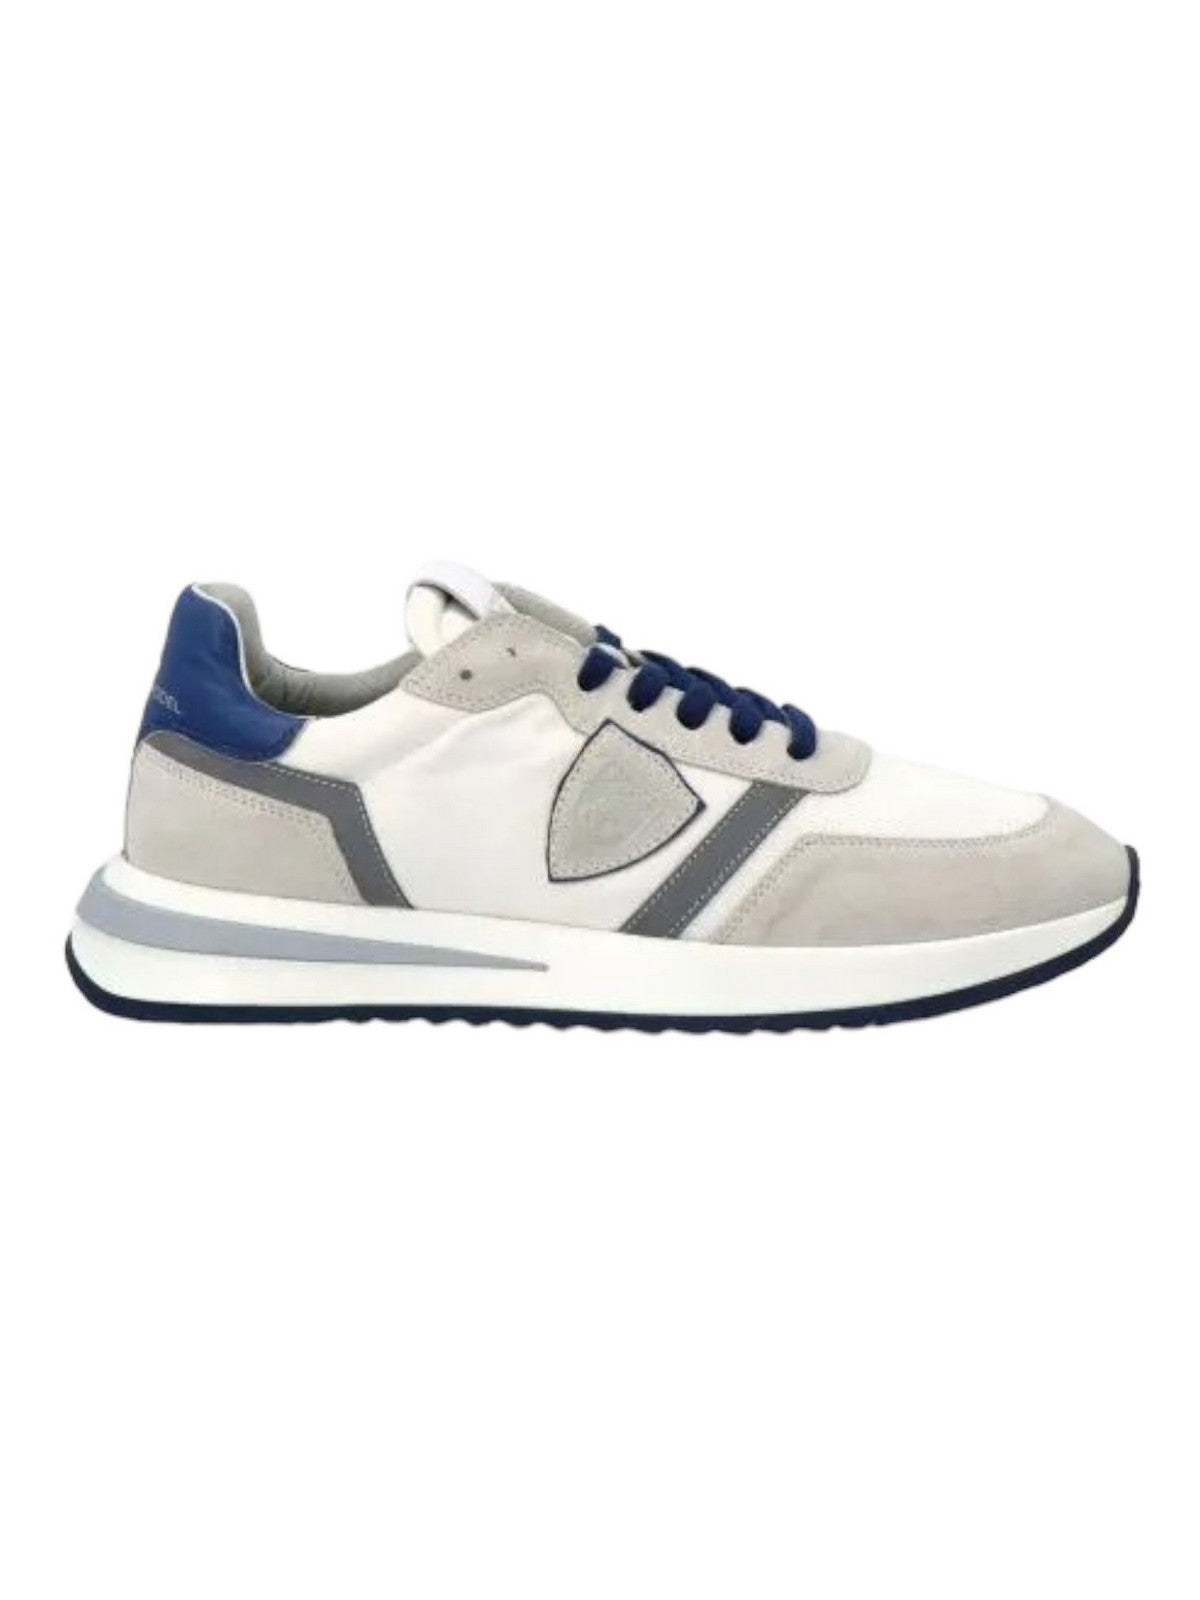 PHILIPPE MODEL Chaussures pour hommes TYLU WP02 Blanc